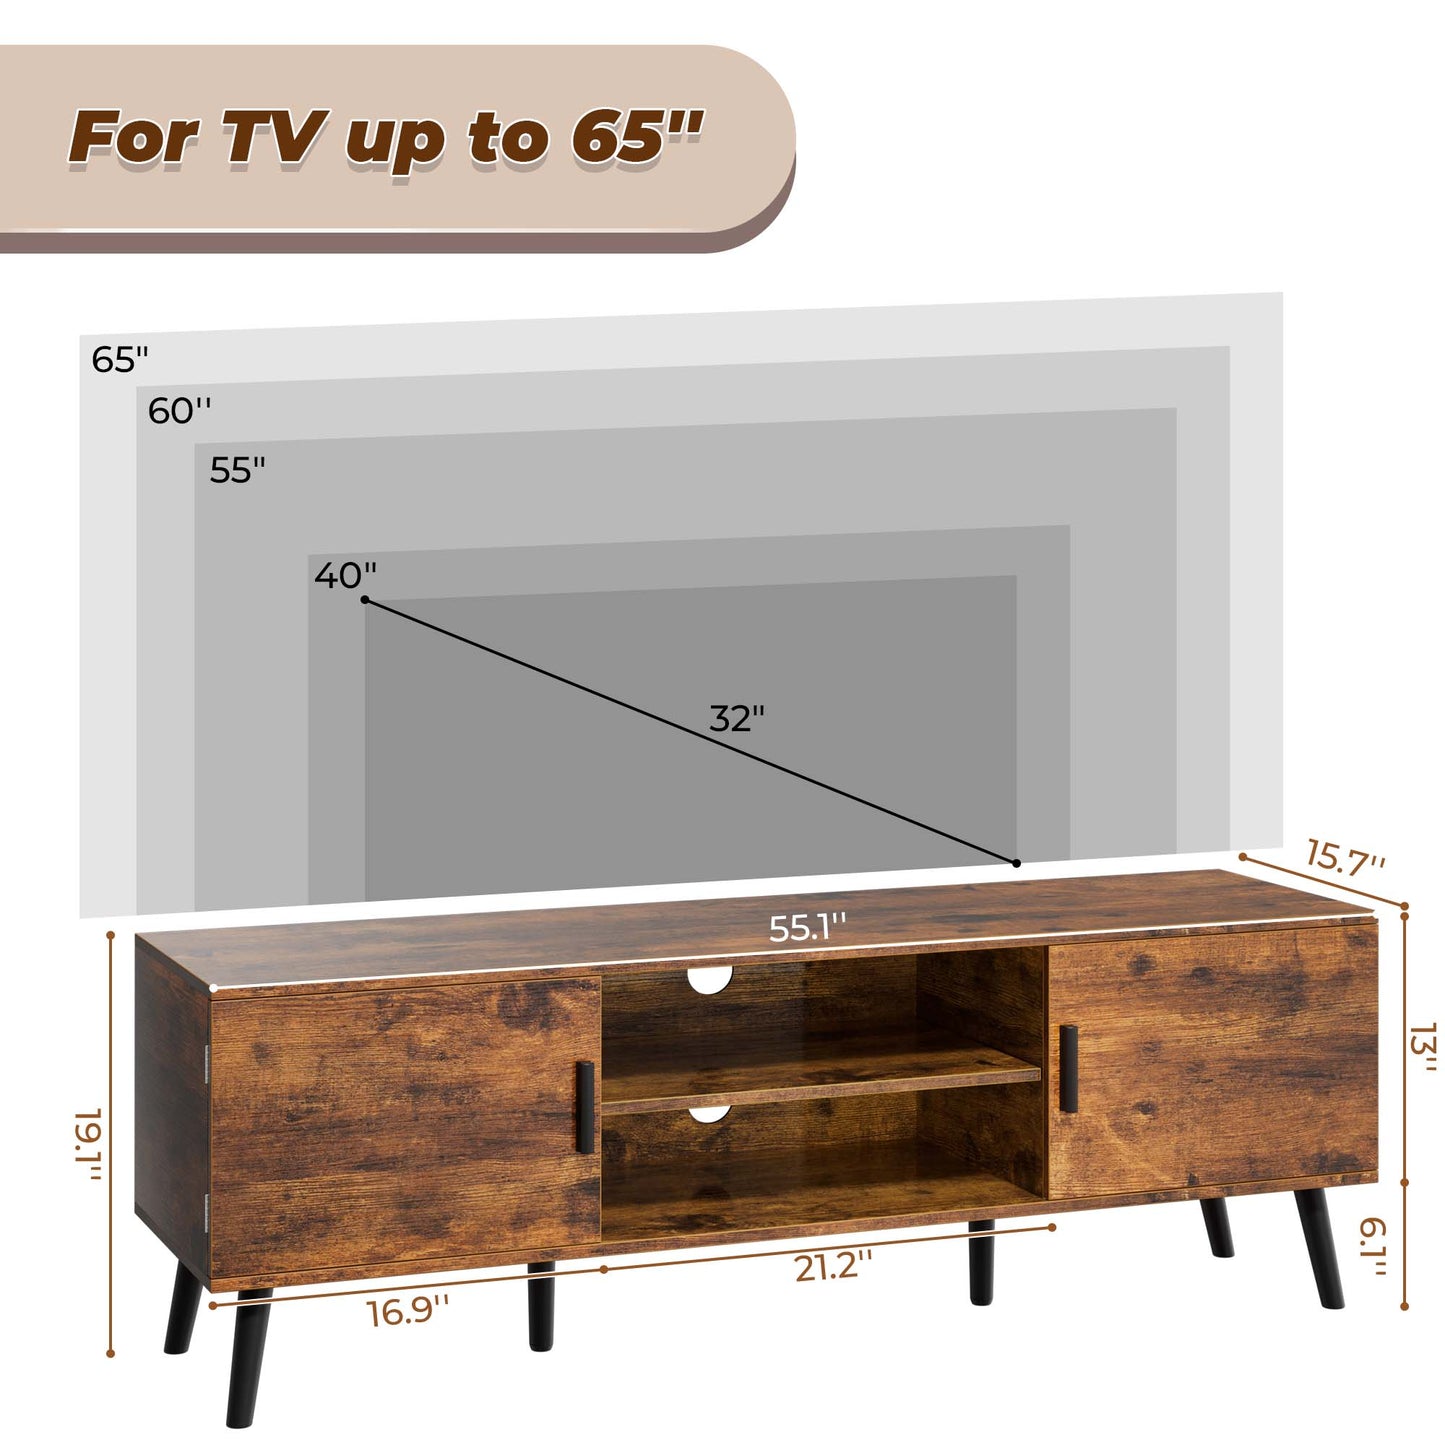 SUPERJARE TV Stand for 55 Inch TV, Entertainment Center with Adjustable Shelf, 2 Cabinets, TV Console Table, Media Console, Solid Wood Feet, Cord Holes, Rustic Brown